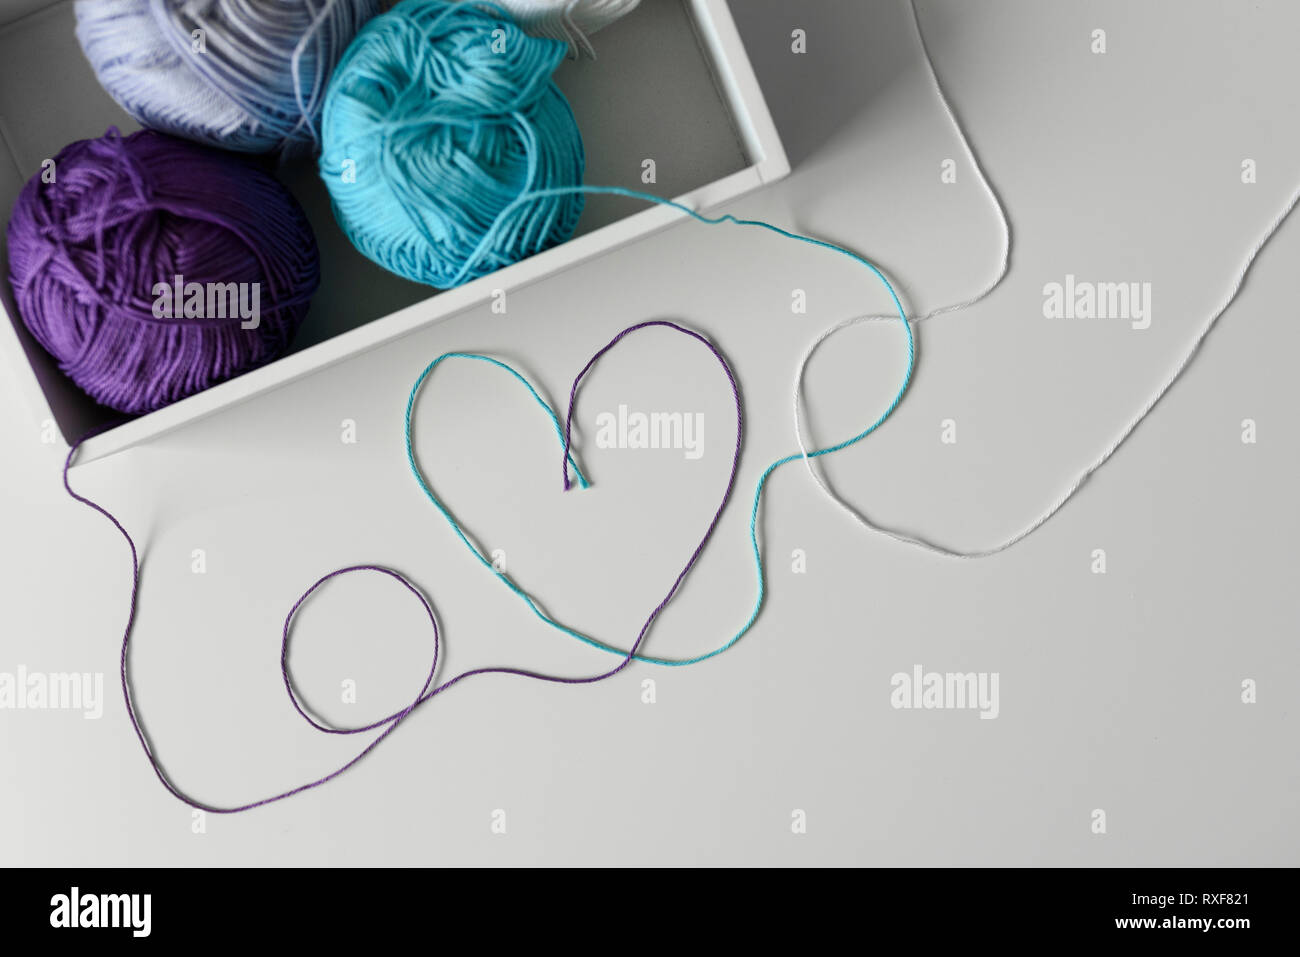 Creative and romantic way of design a love word with heart on white background from colorful threads coming out from wood box with knitting wools. Stock Photo